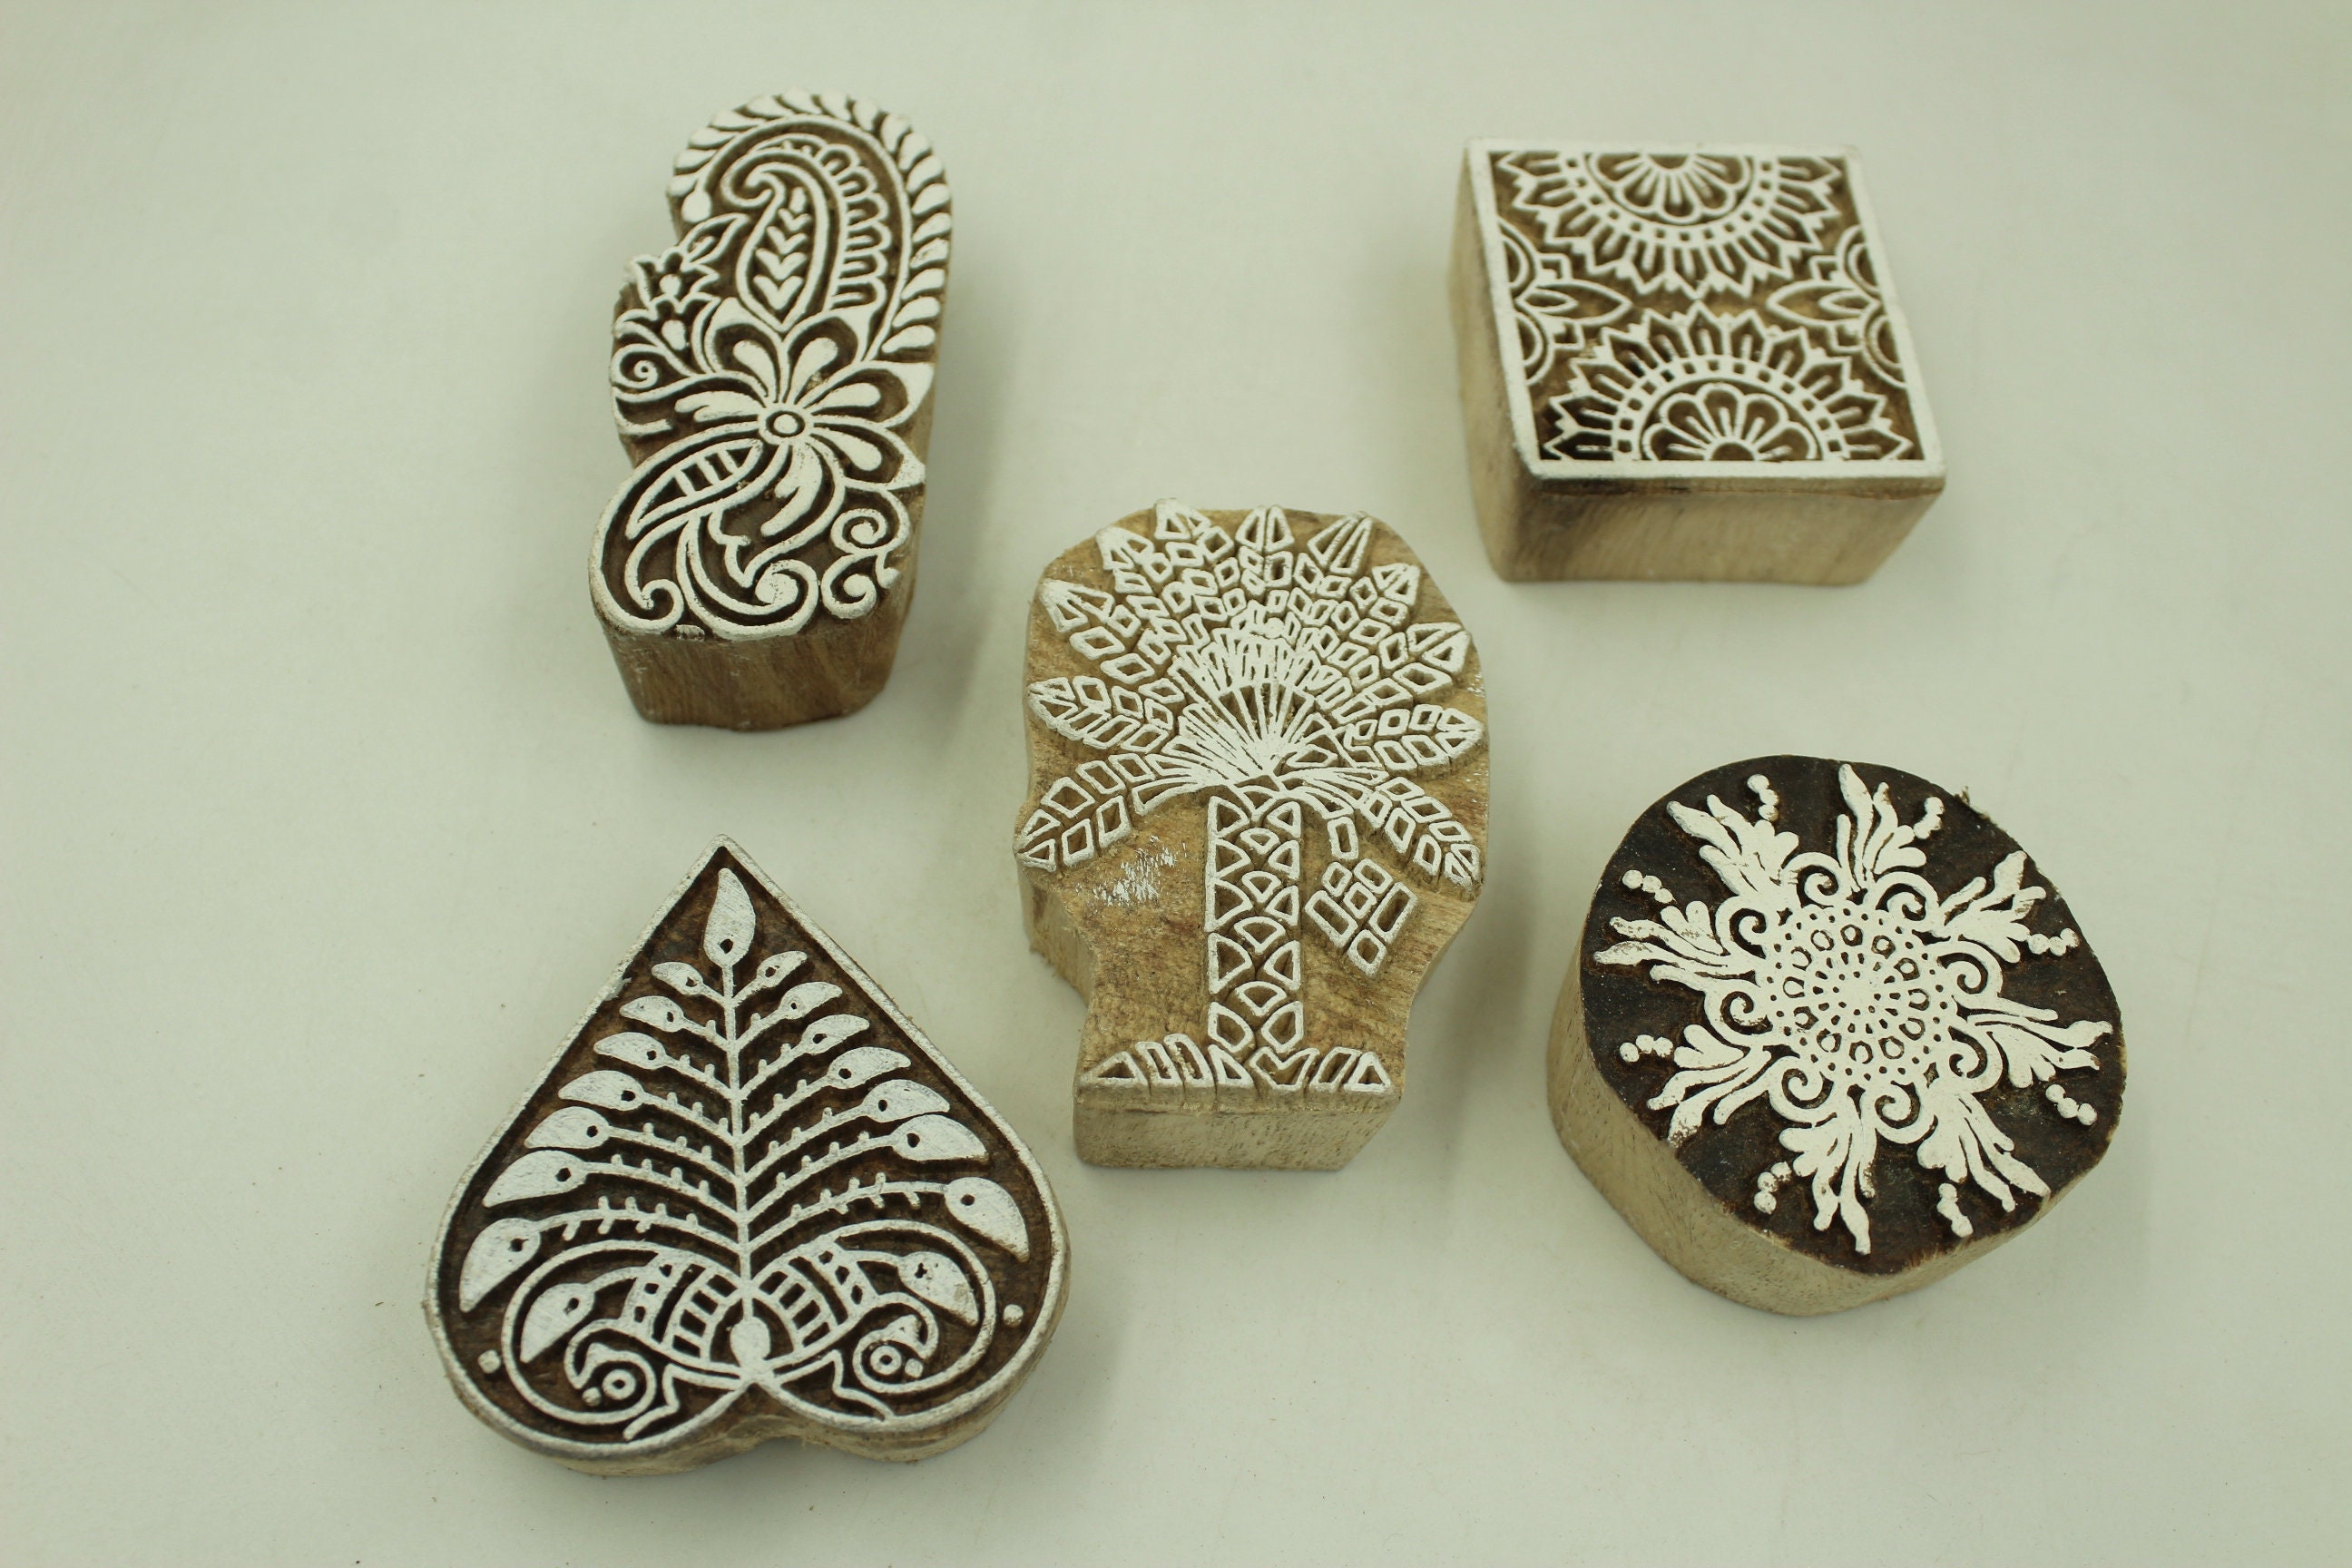 Wooden Printing Block Stamp Hand Made Printing Block Print on Fabric, Clay,  Tattoo, Cookies and Henna 